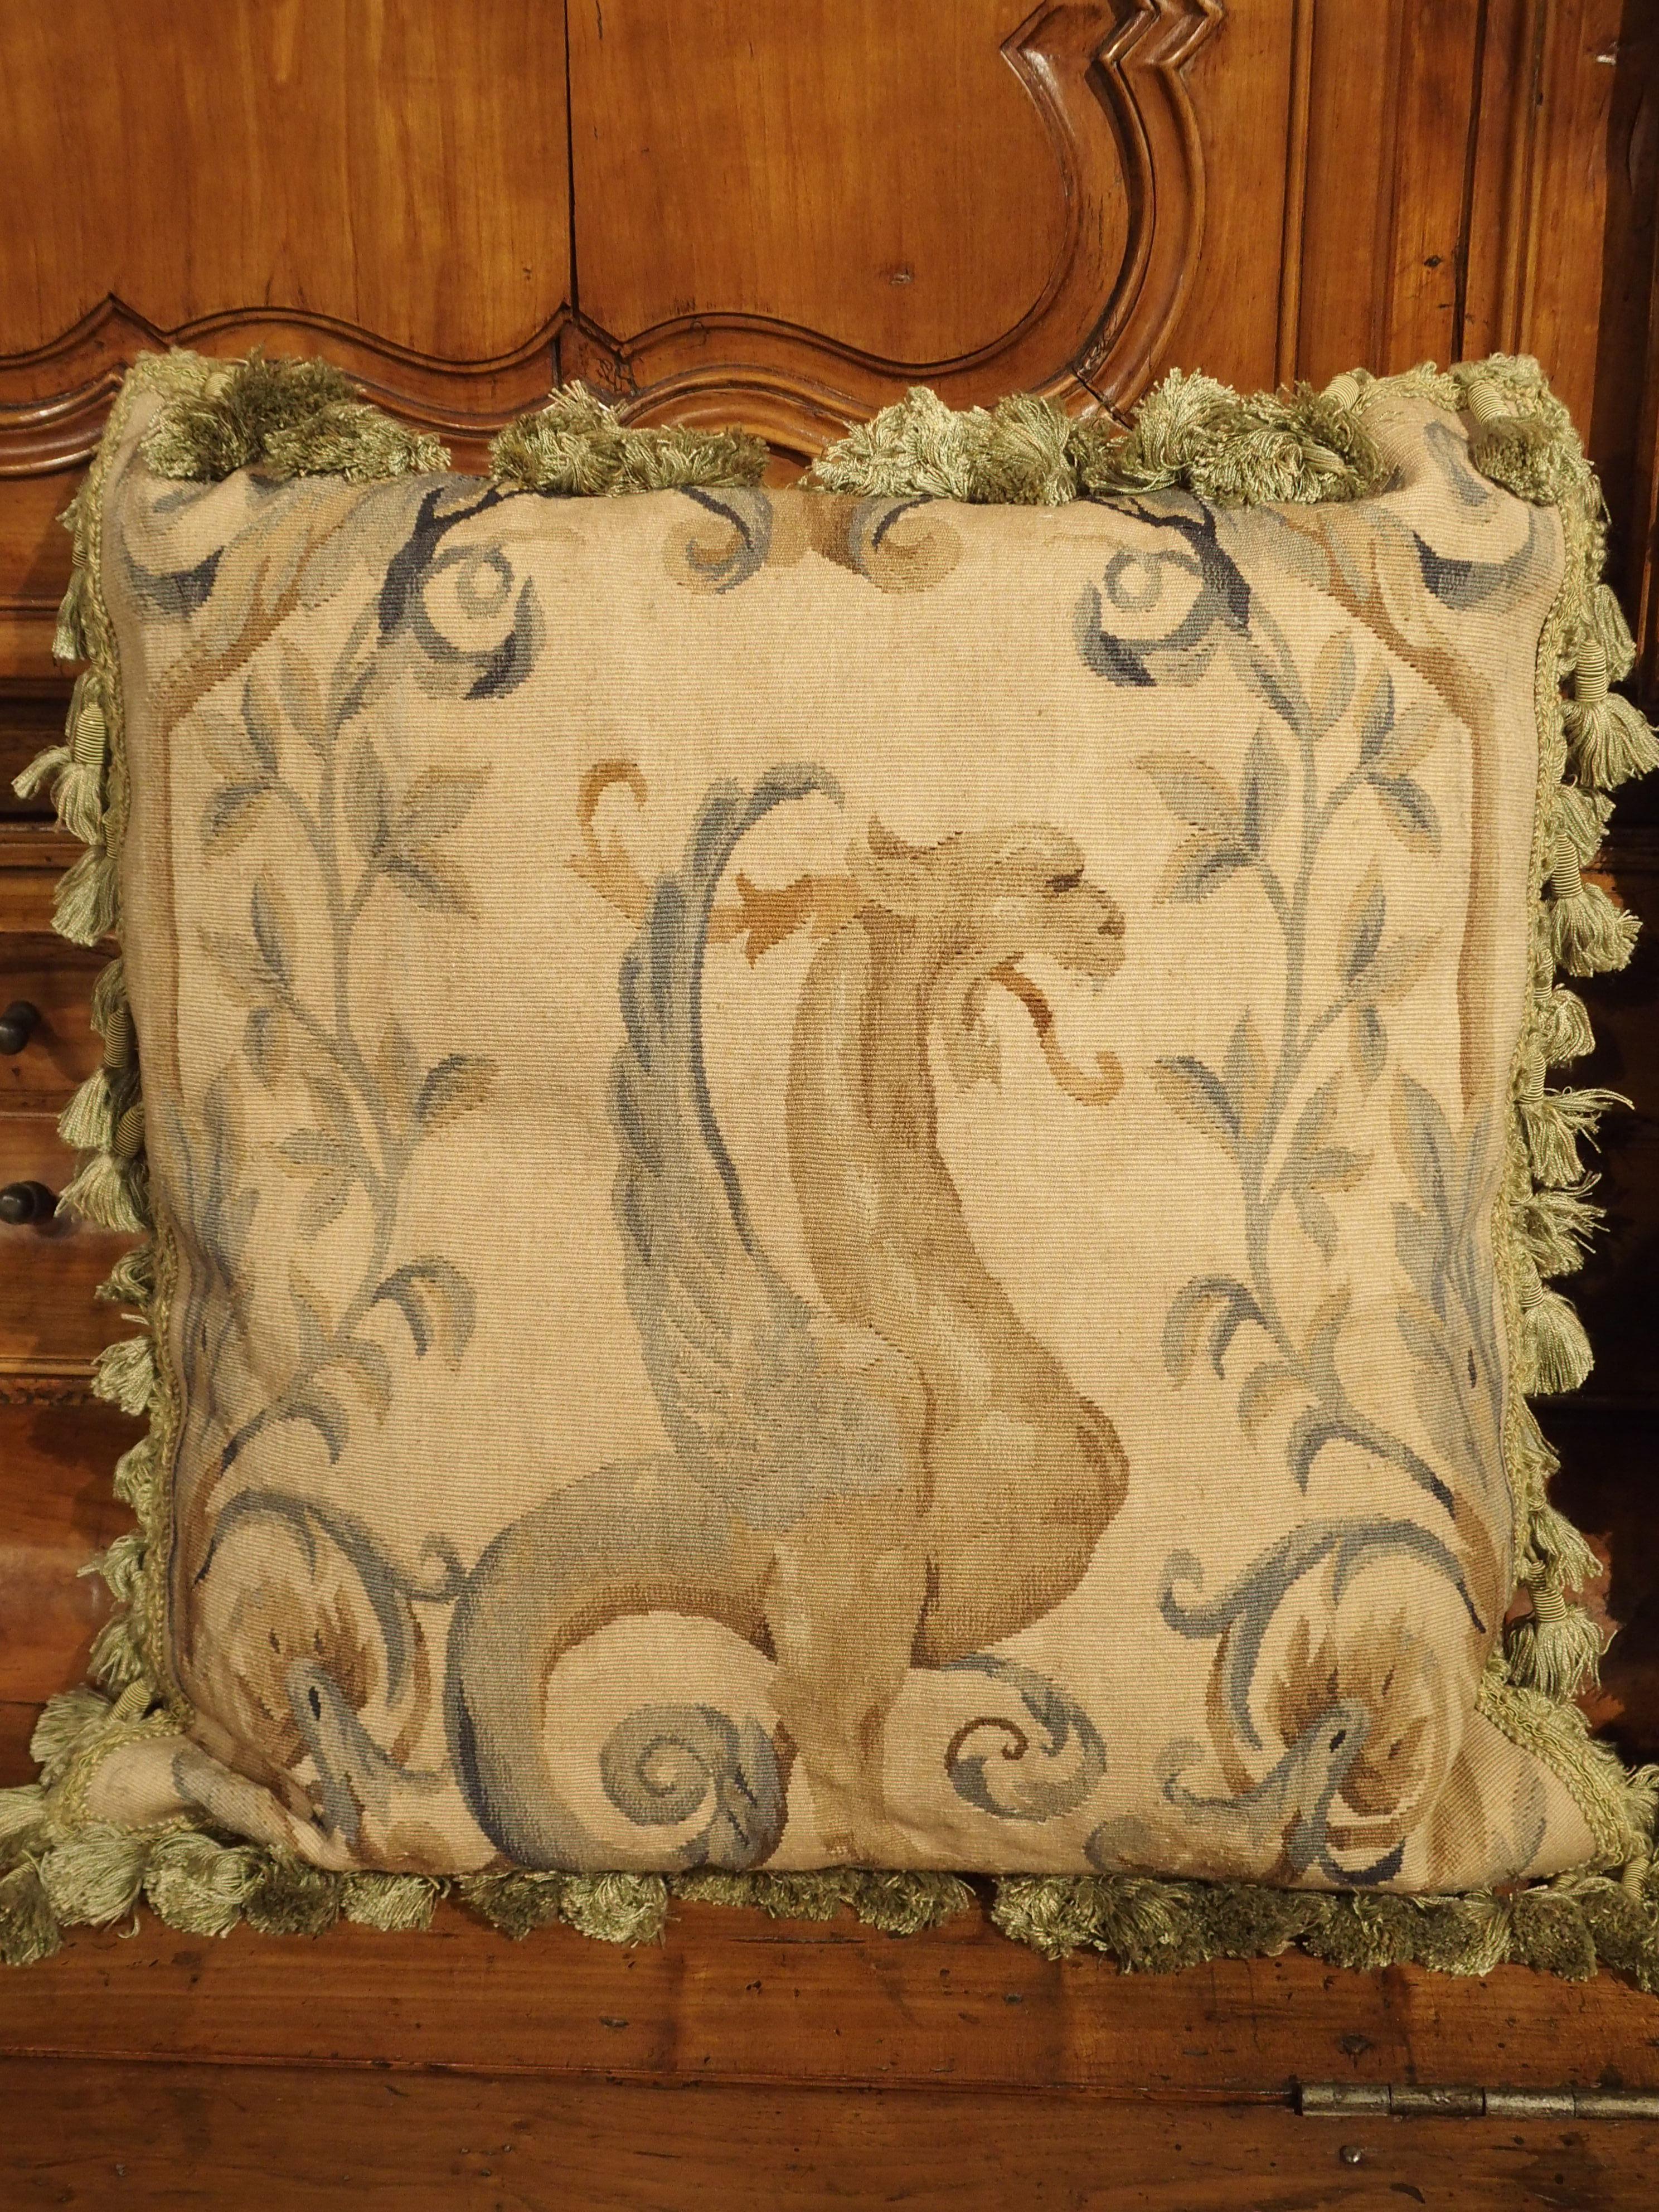 These French pillows have Aubusson tapestry from the 1600s. Stunning half figures of winged griffins with the head and wings of an eagle and the body of a lion have been woven with meticulous skill. Each griffin rests upon a small platform. Varying